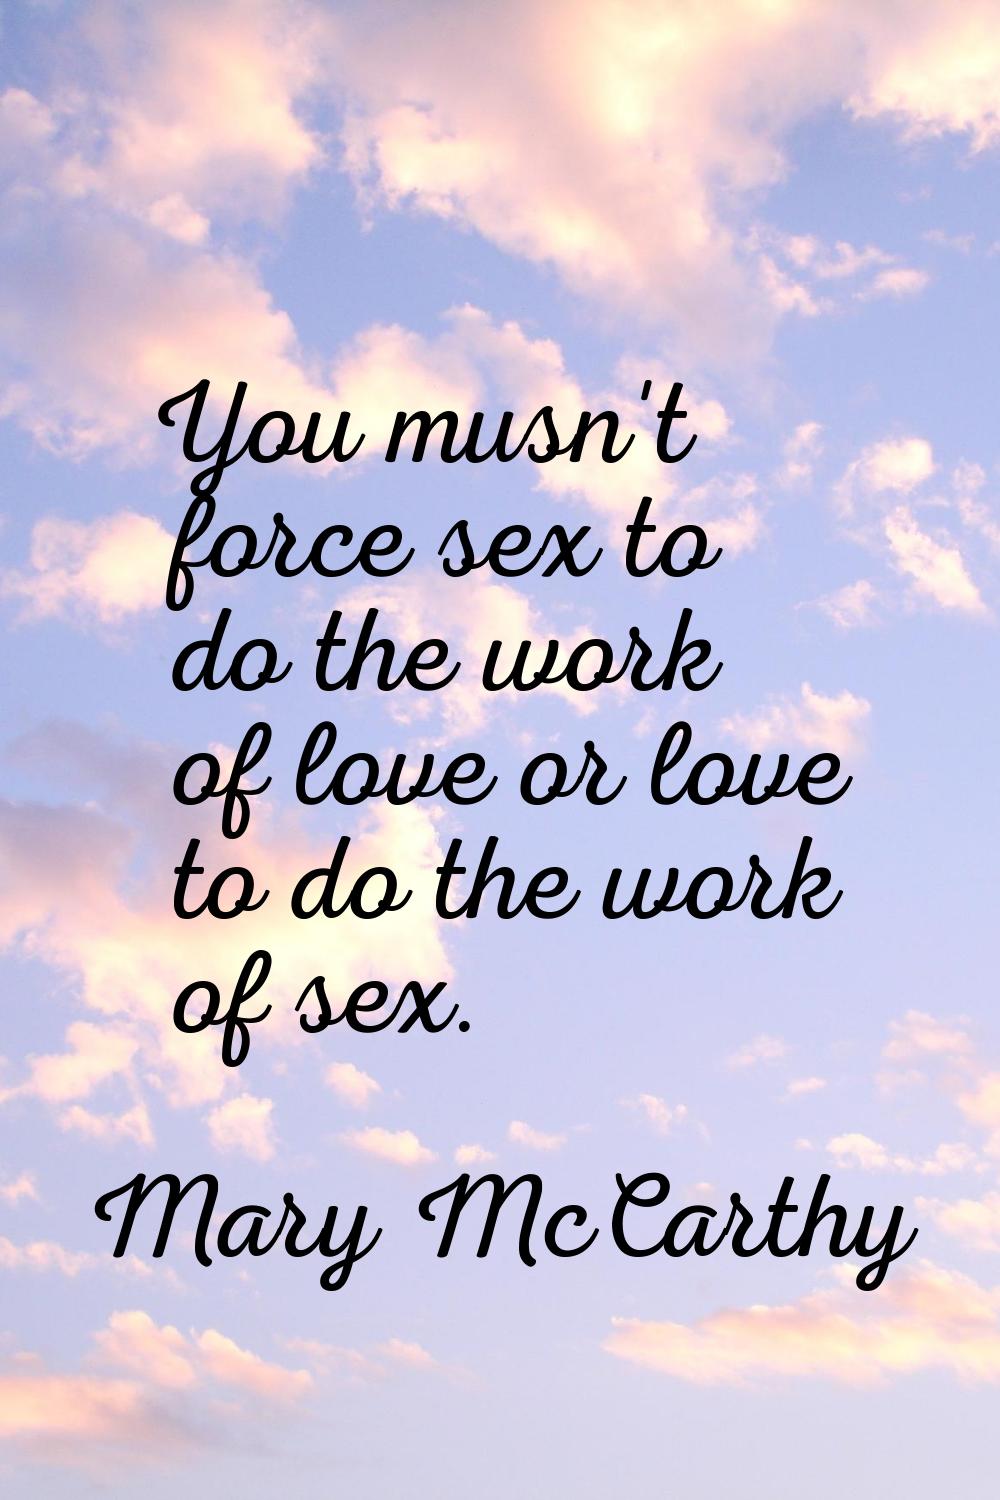 You musn't force sex to do the work of love or love to do the work of sex.